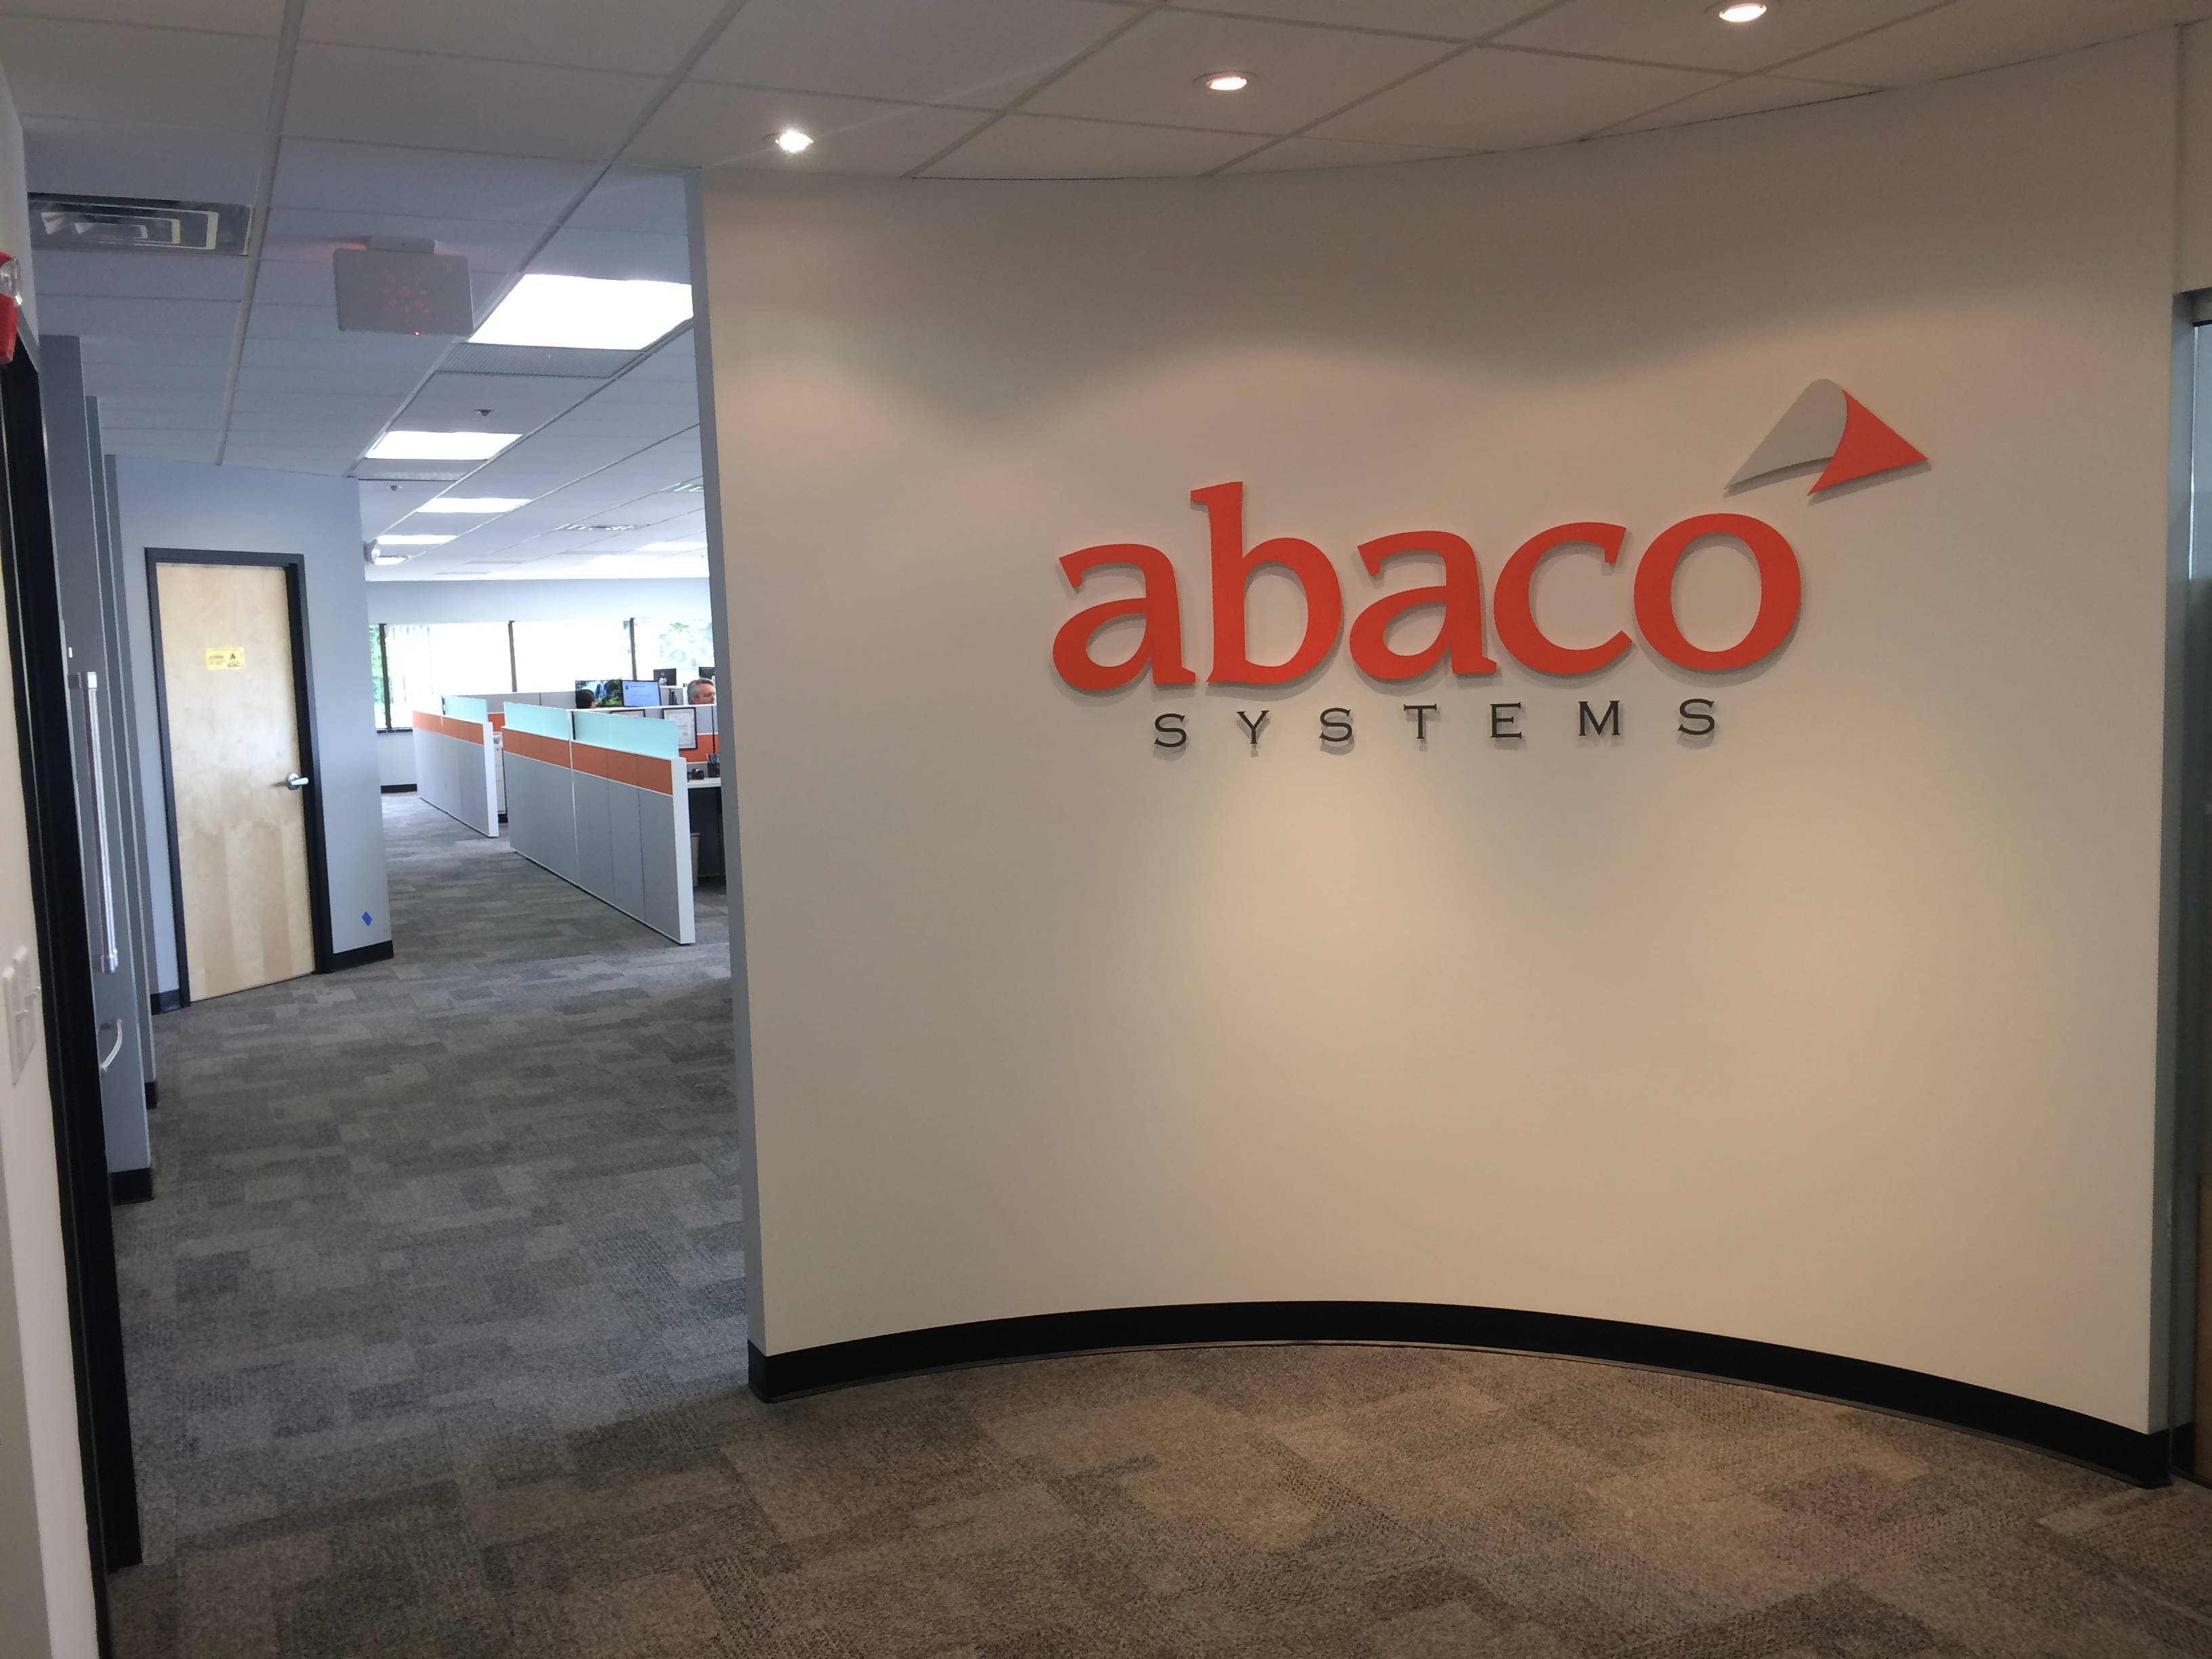 Abaco Systems HPEC Innovation Center